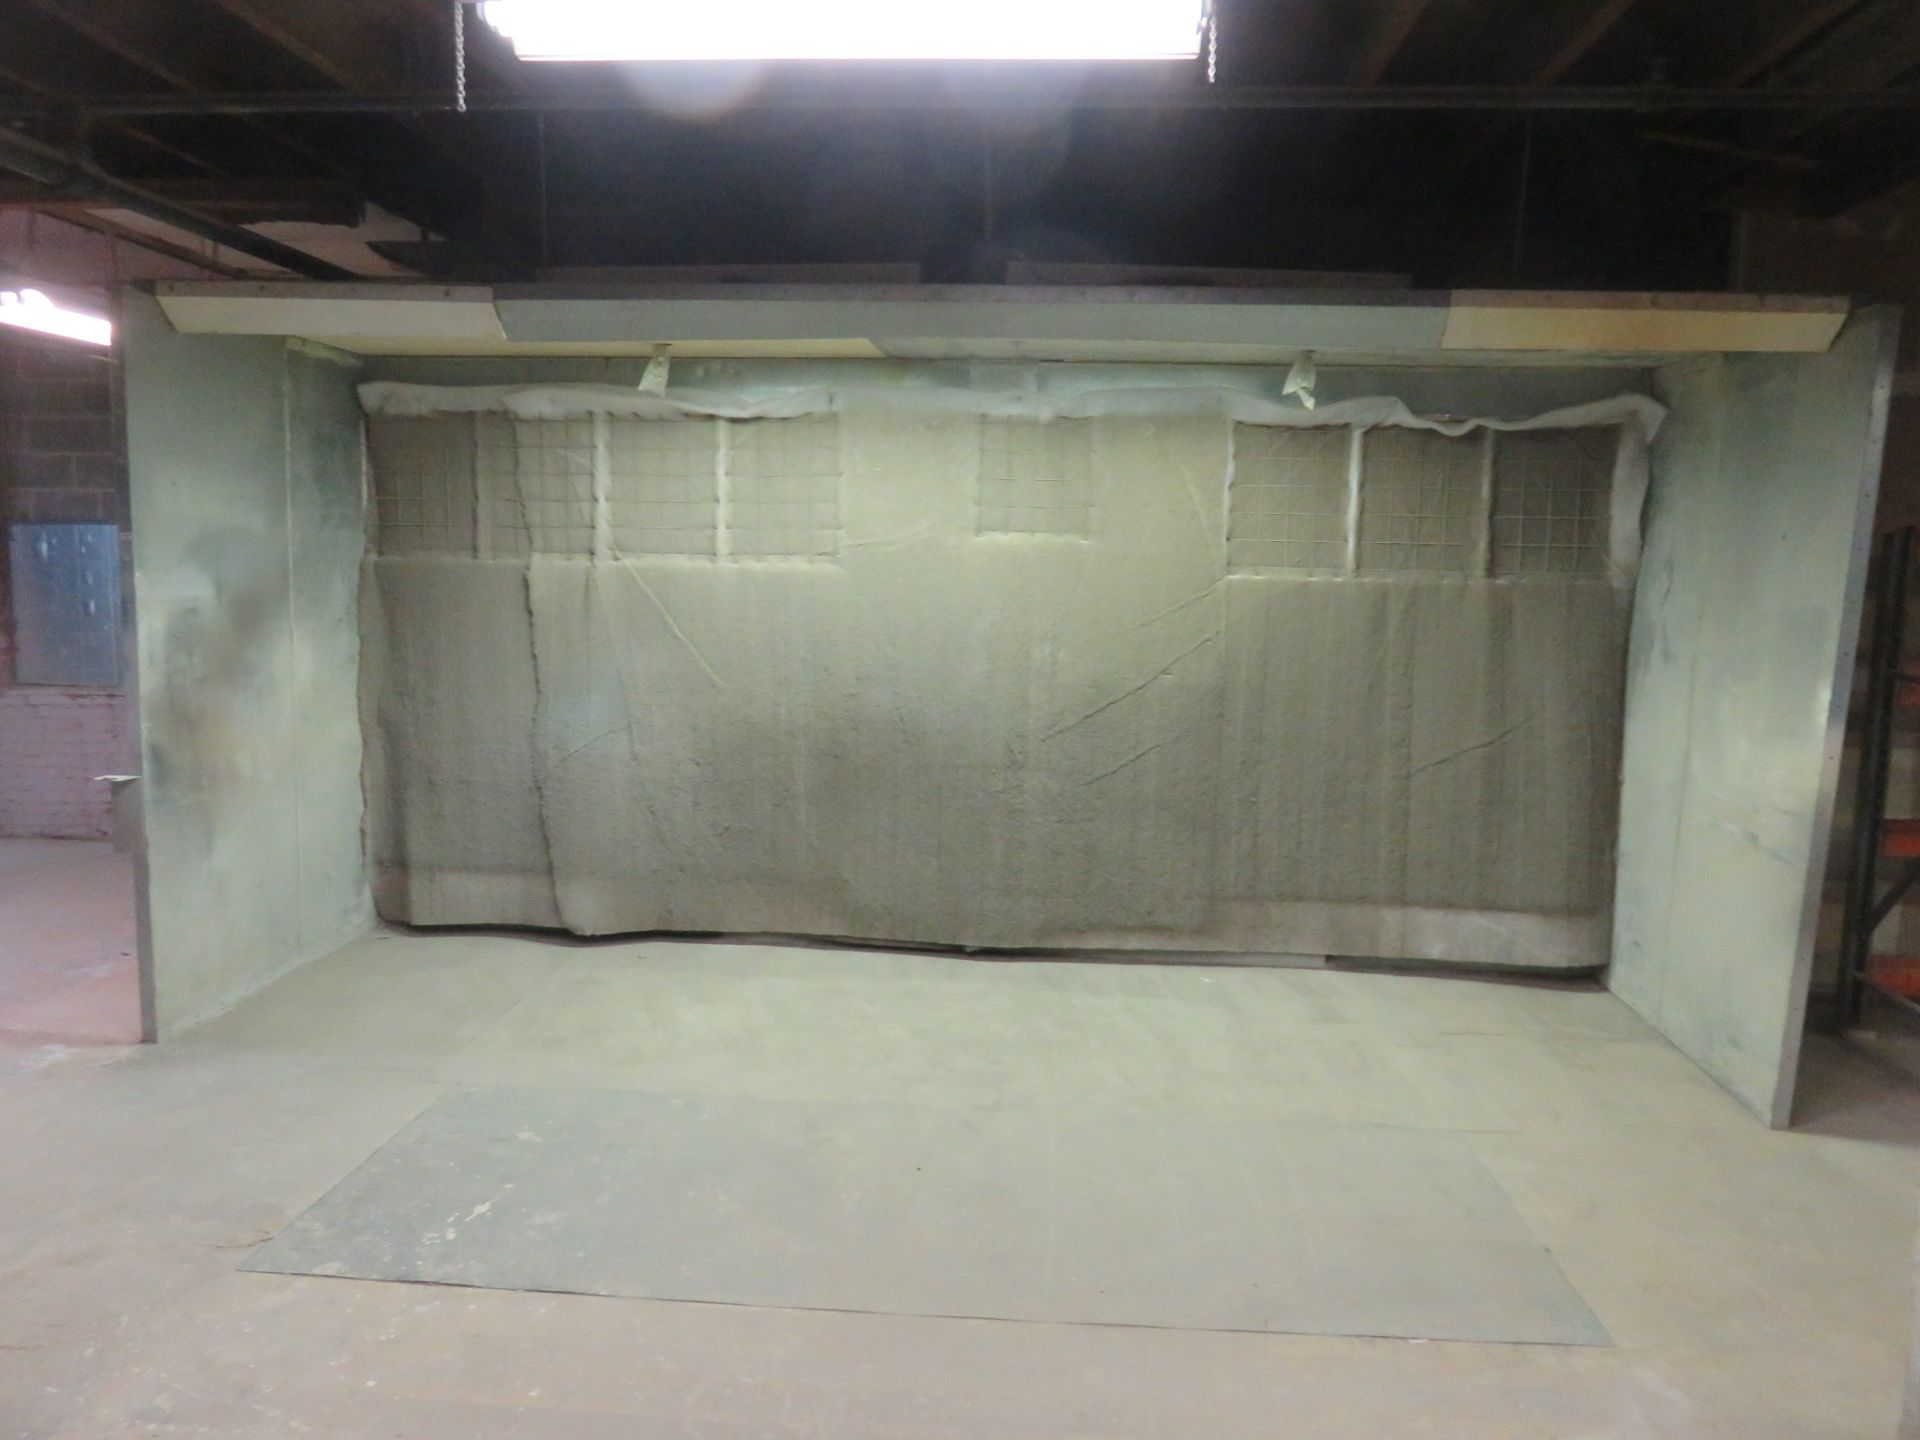 Paint Booth approx. 17 'x 8' x 8'